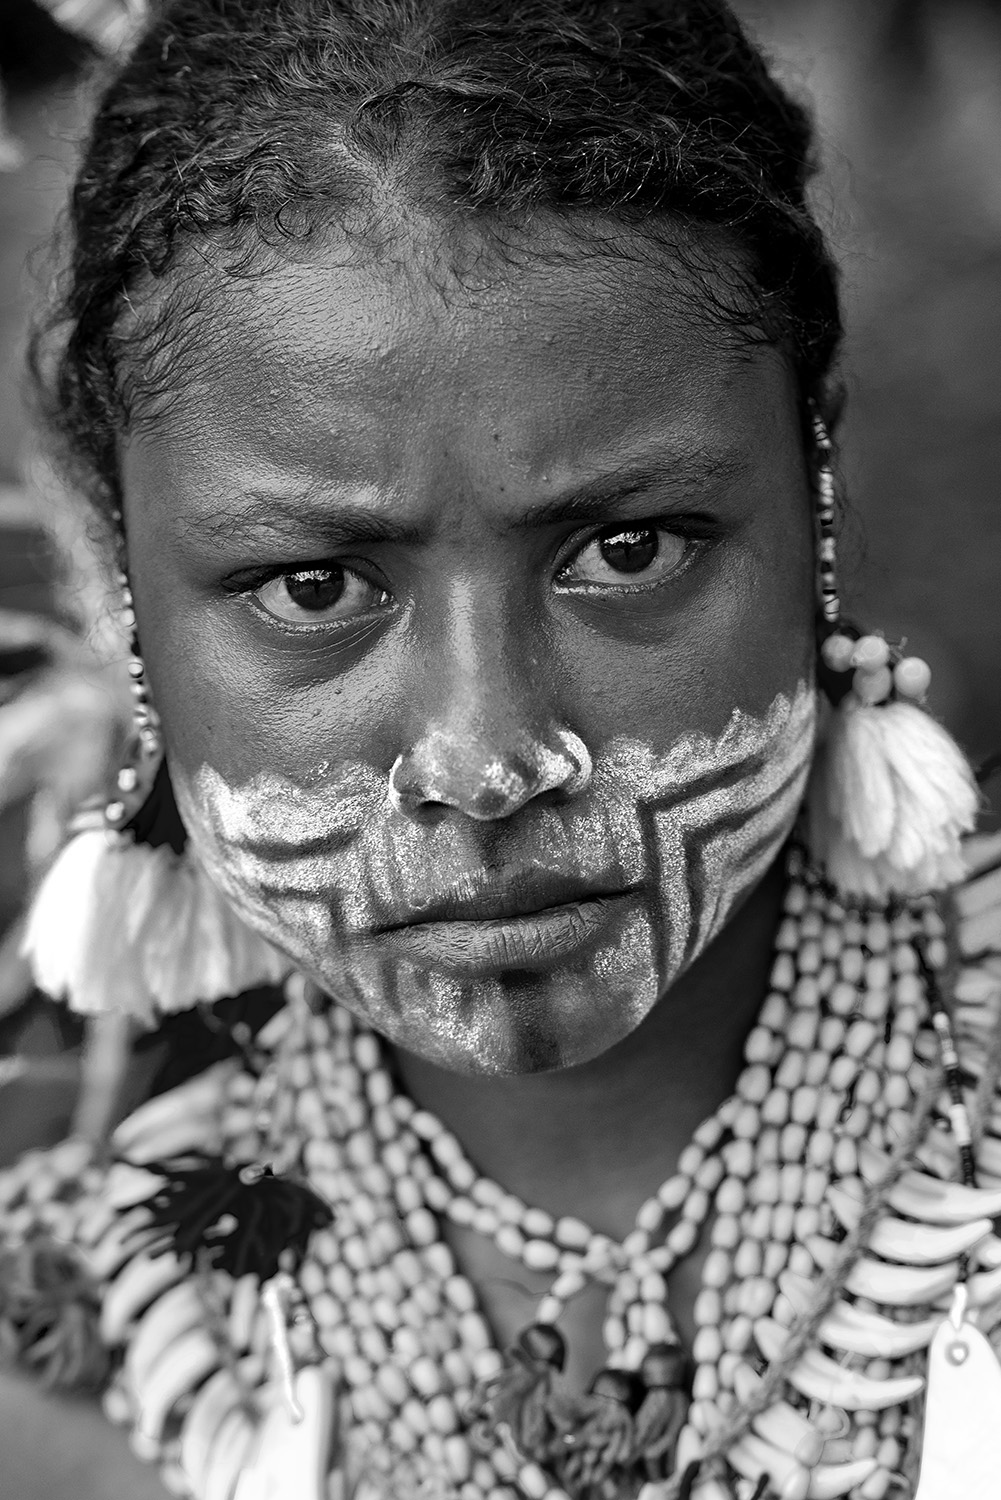 image of AARONTAIT COPYRIGHTED 2014 266 PNG PAPUA NEW GUNIEA DOCUMENTARY PHOTOGRAPHER BLACK WHITE PORTRAIT TRIBAL TRADITIONAL TRAVEL PHOTOGRAPHER GIRL